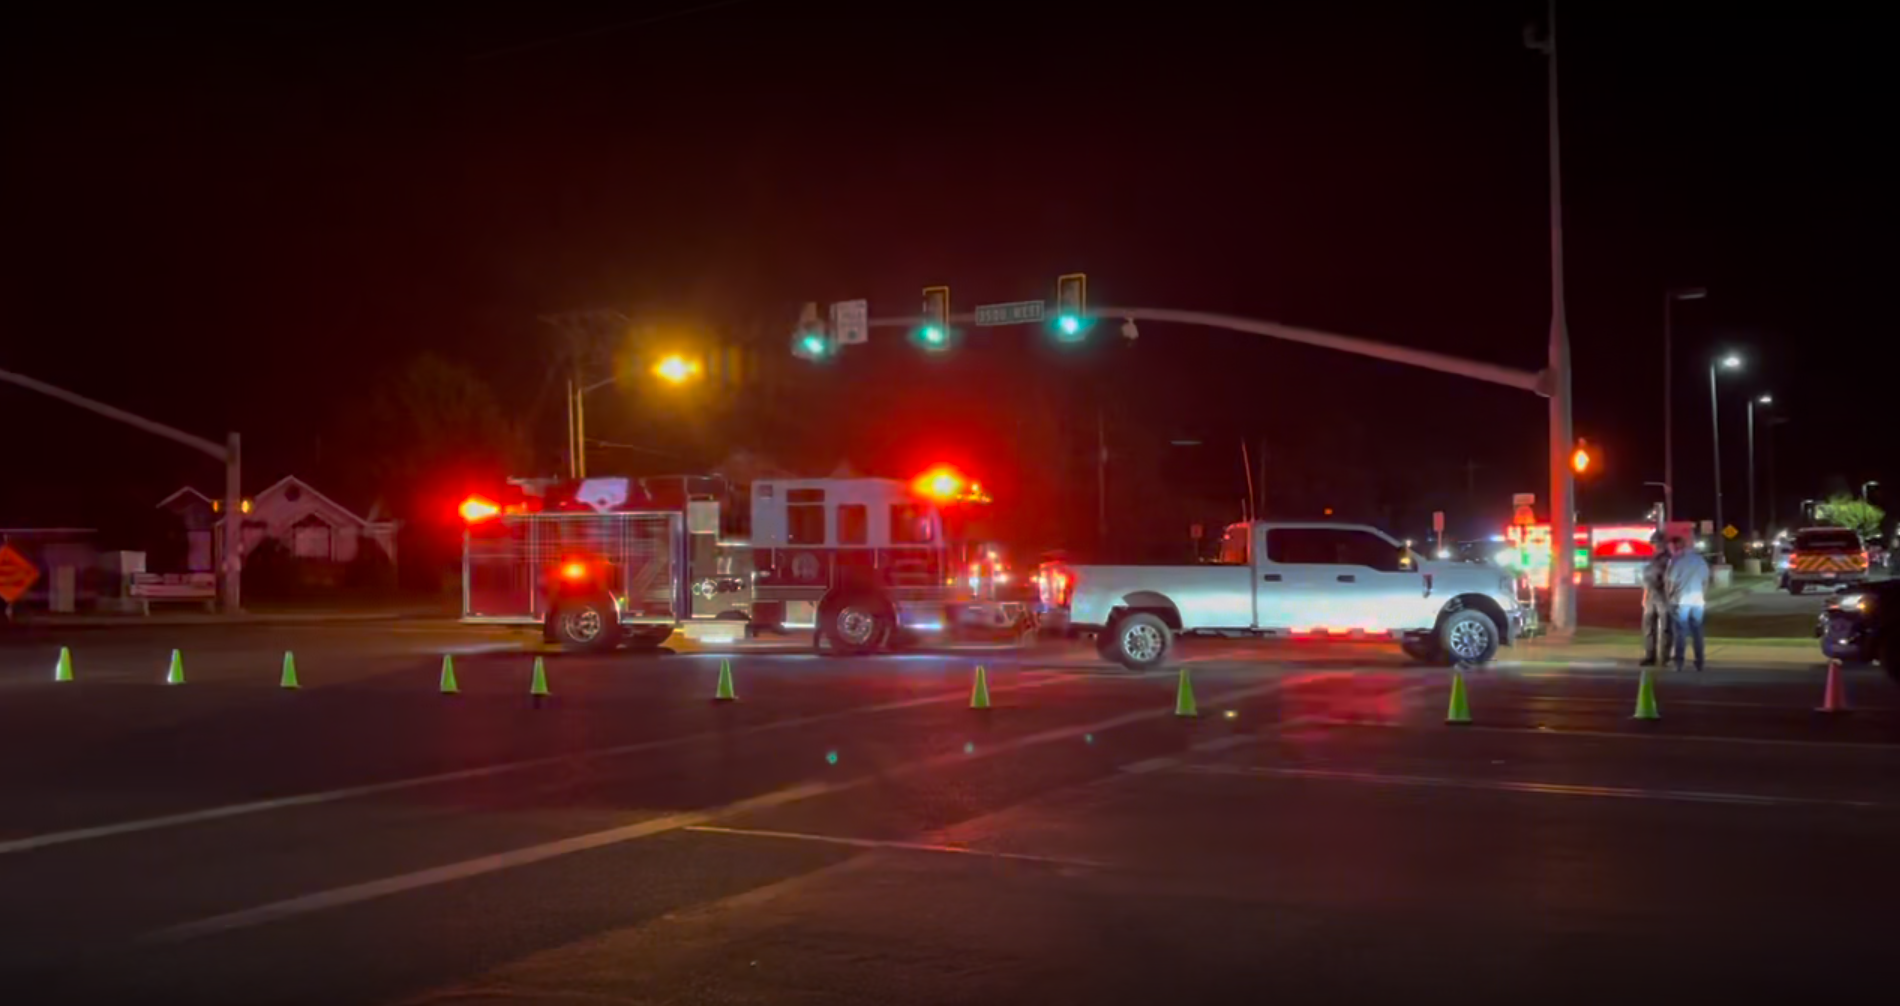 ROY, Utah -- A 31-year-old man is dead after a crash in Roy Friday night. The crash occurred on 350...